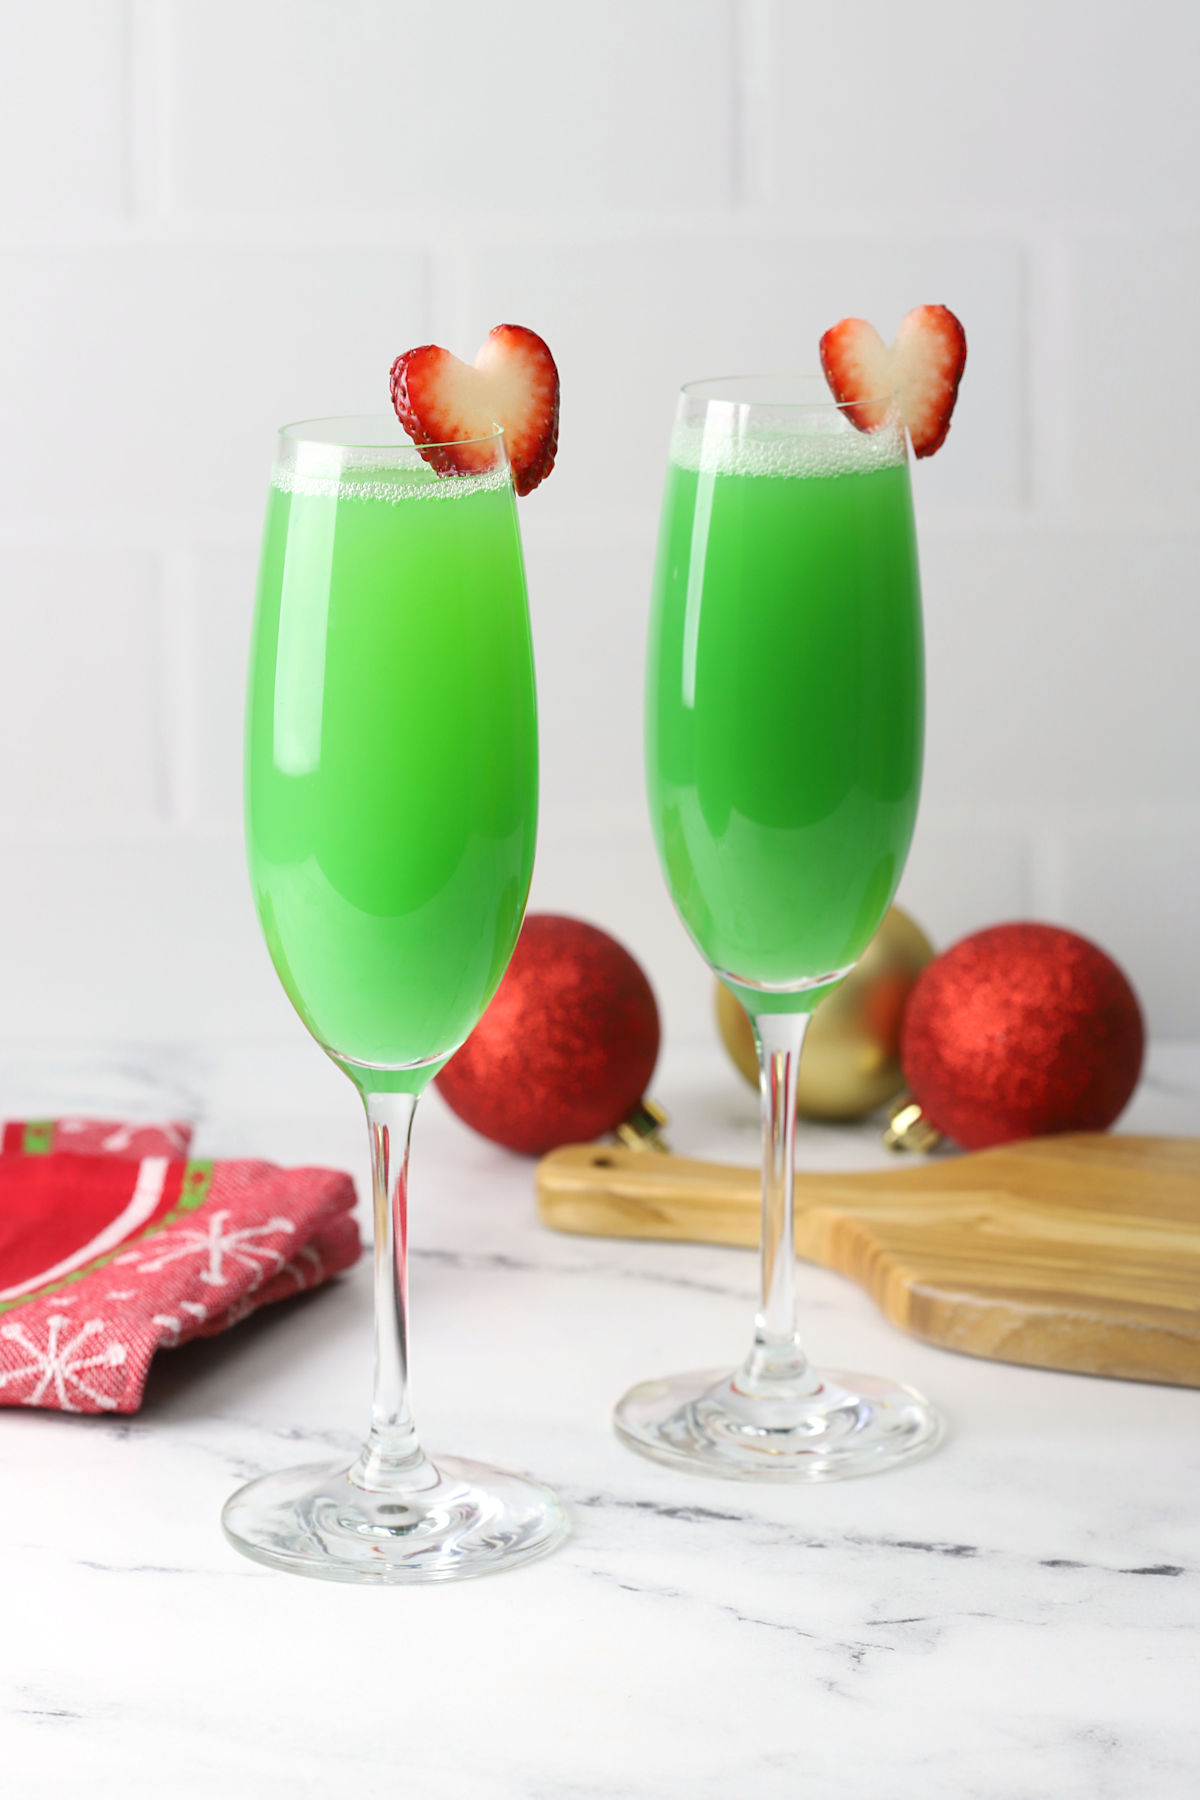 Grinch mimosas on a counter top with strawberry garnishes.